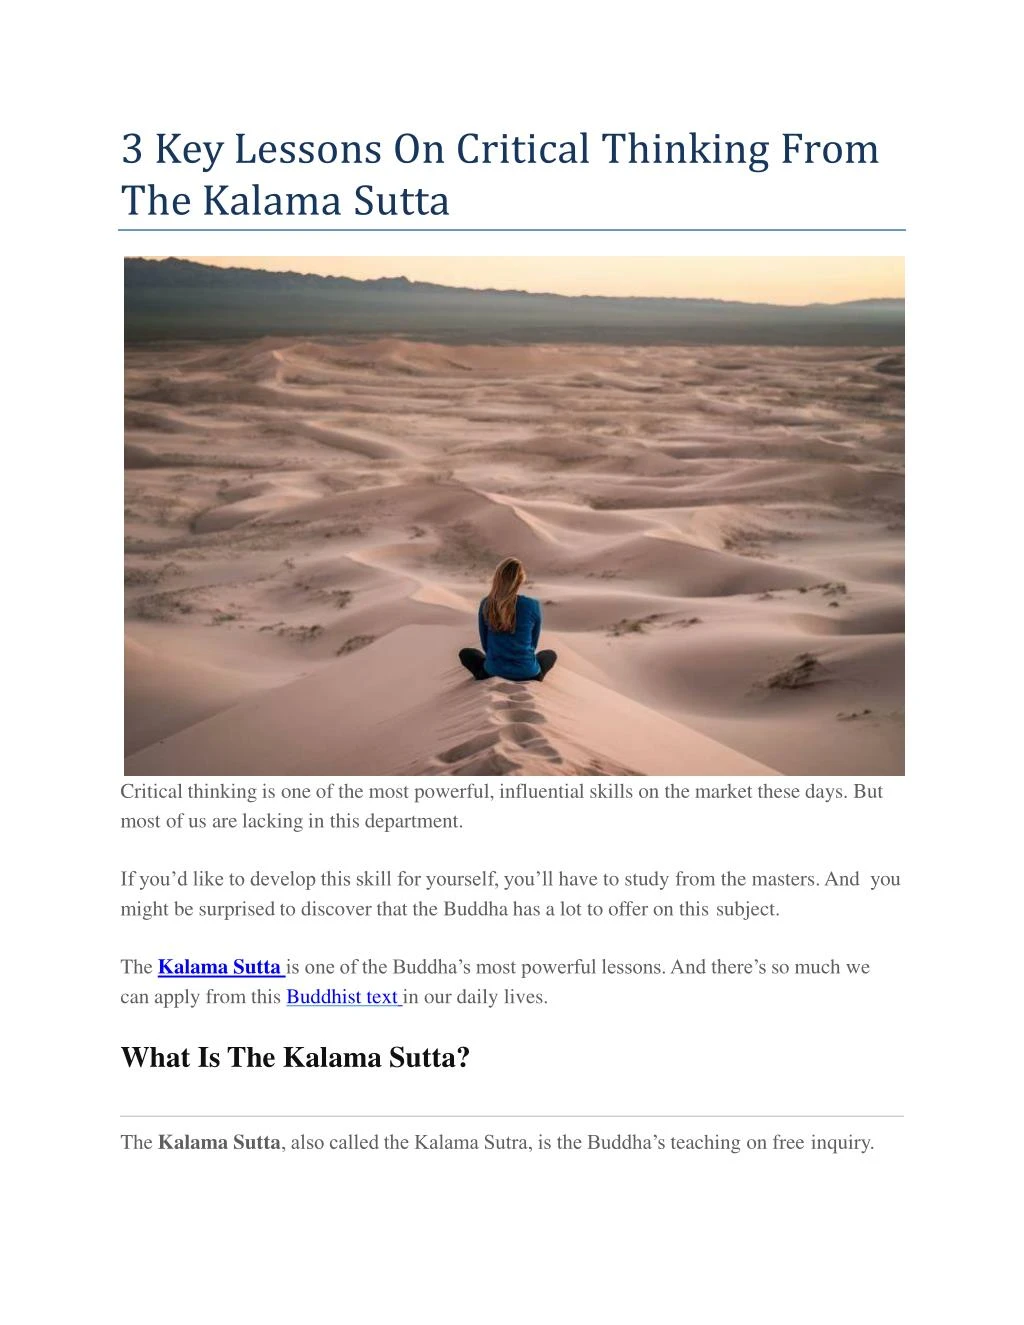 3 key lessons on critical thinking from the kalama sutta